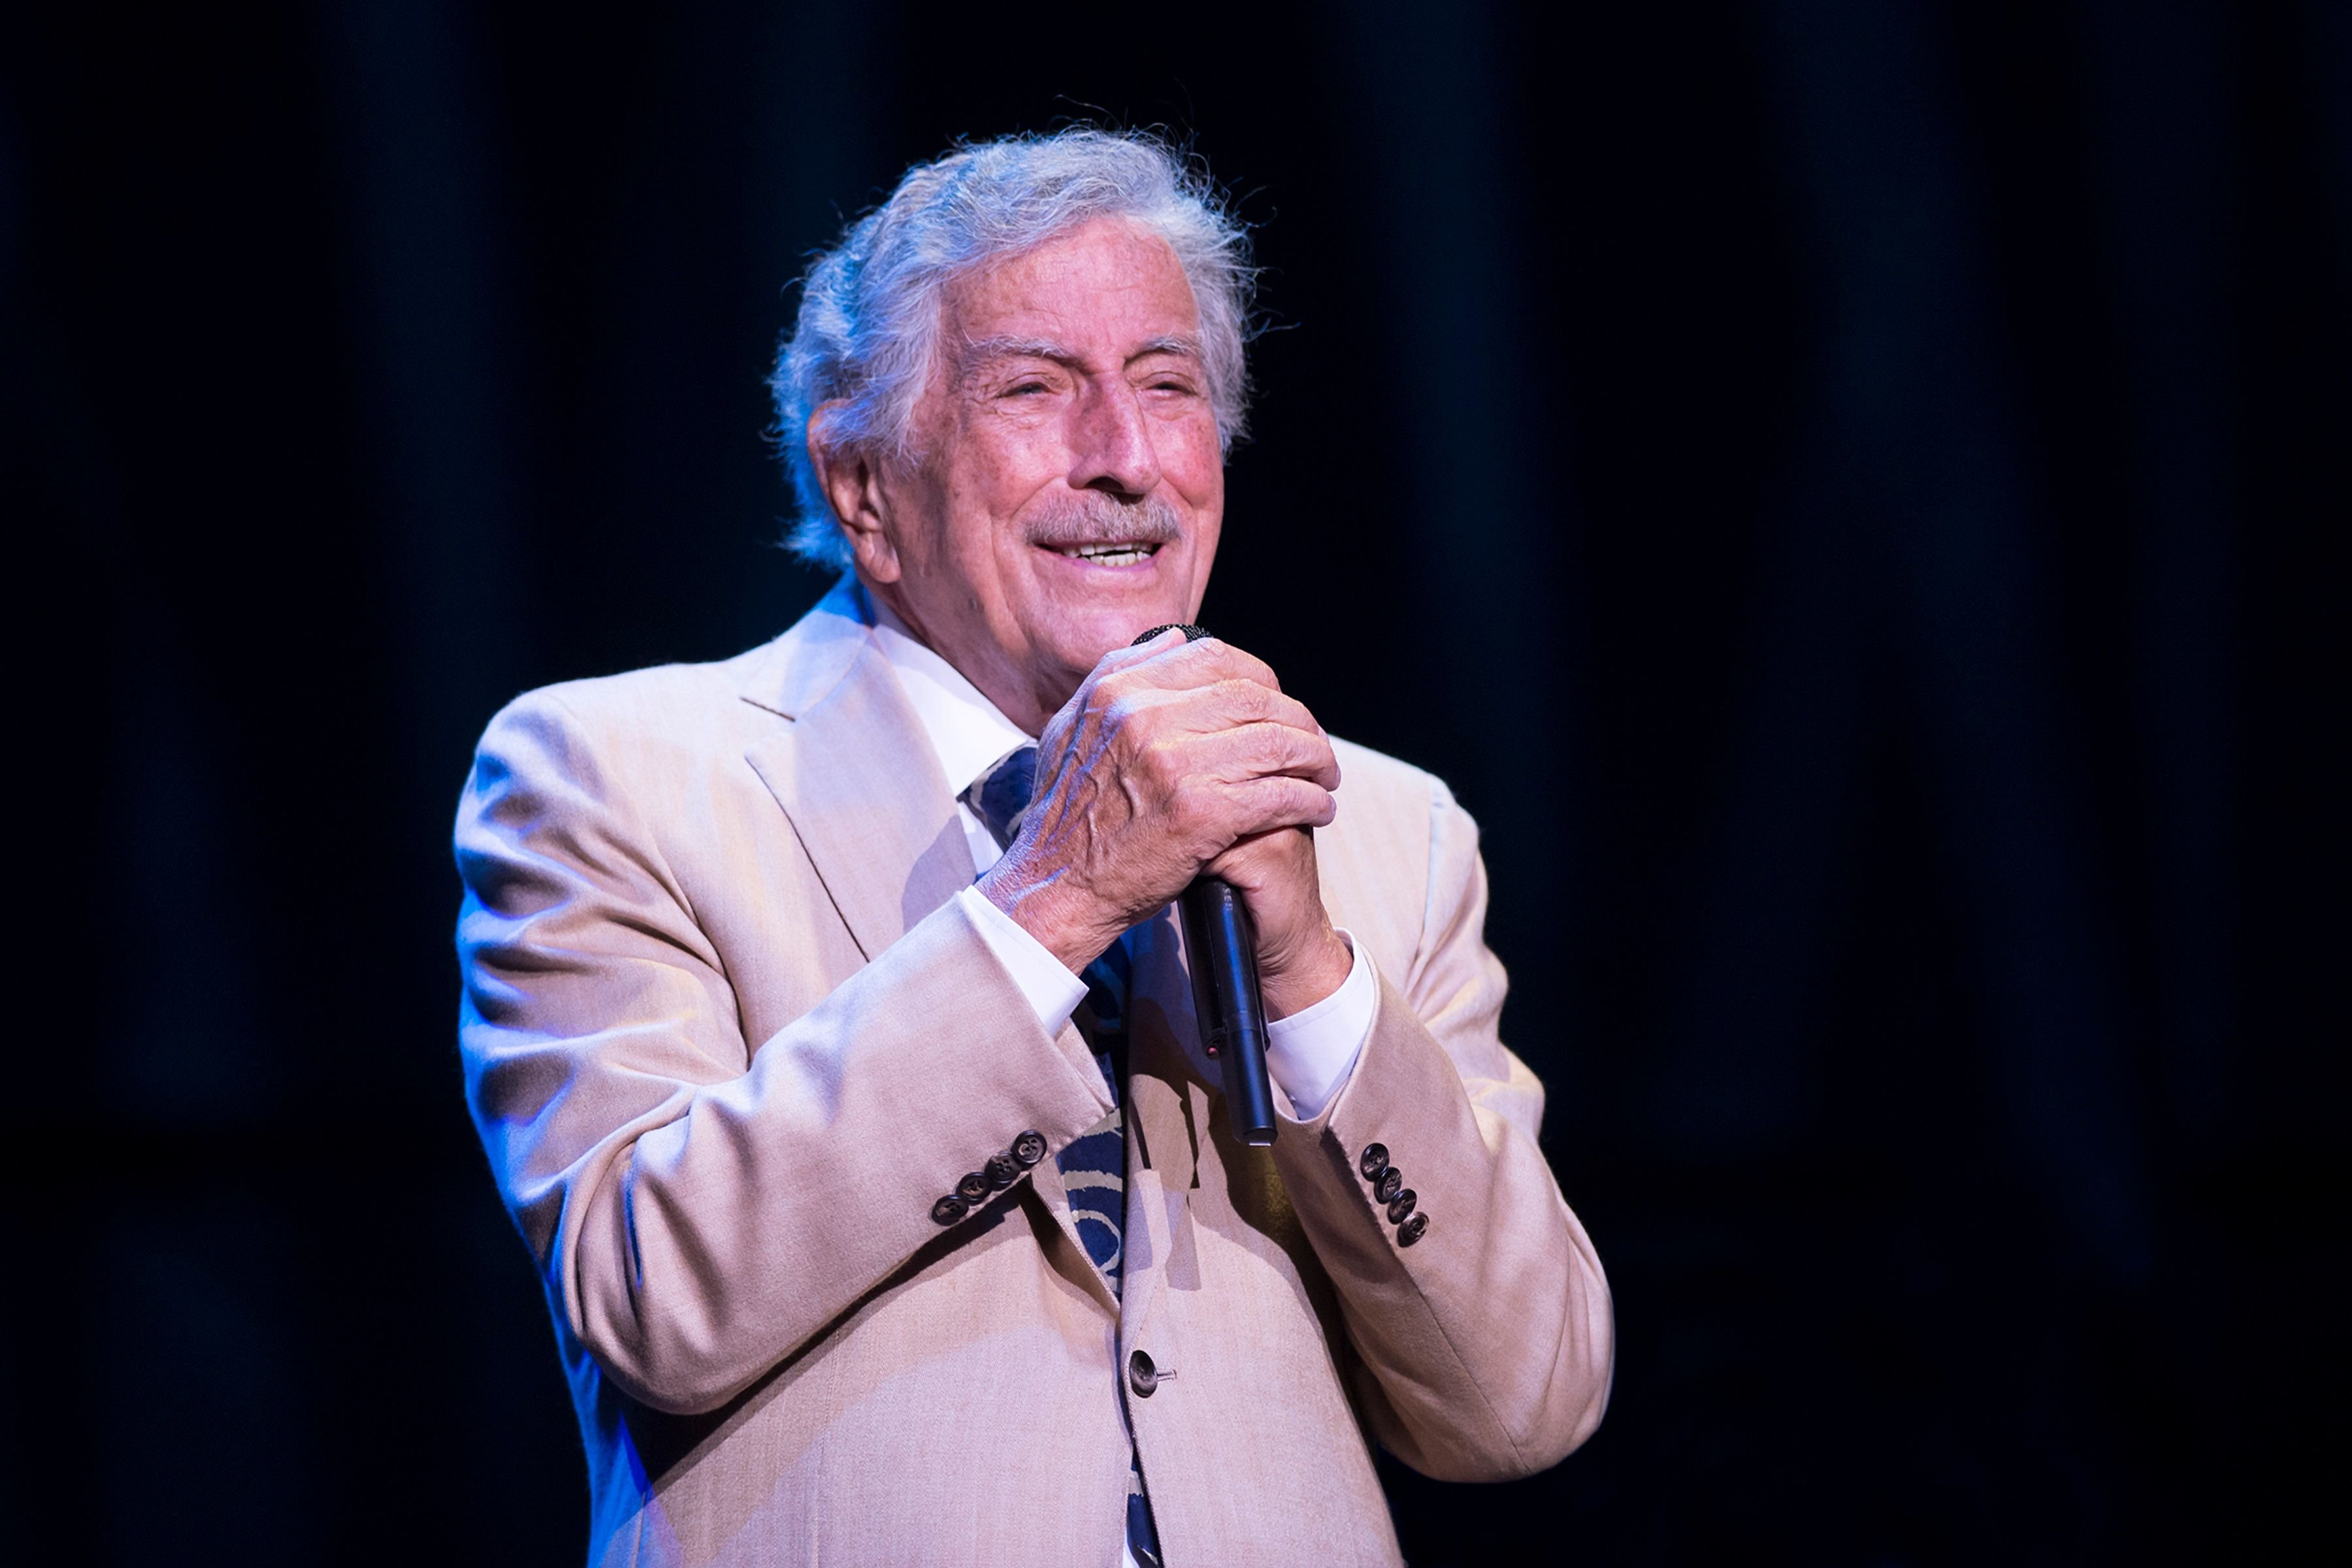 Tony Bennett performing on stage at Royal Albert Hall in London, England | Photo: Getty Images